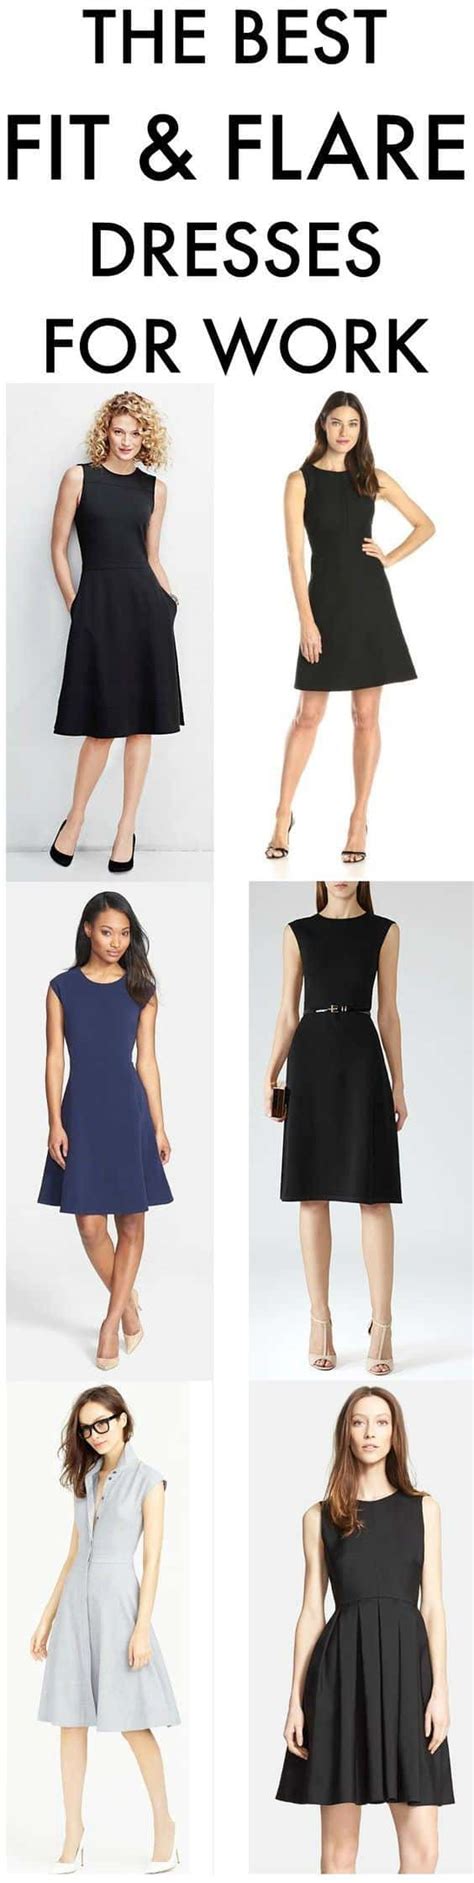 The Hunt Fit And Flare Dresses